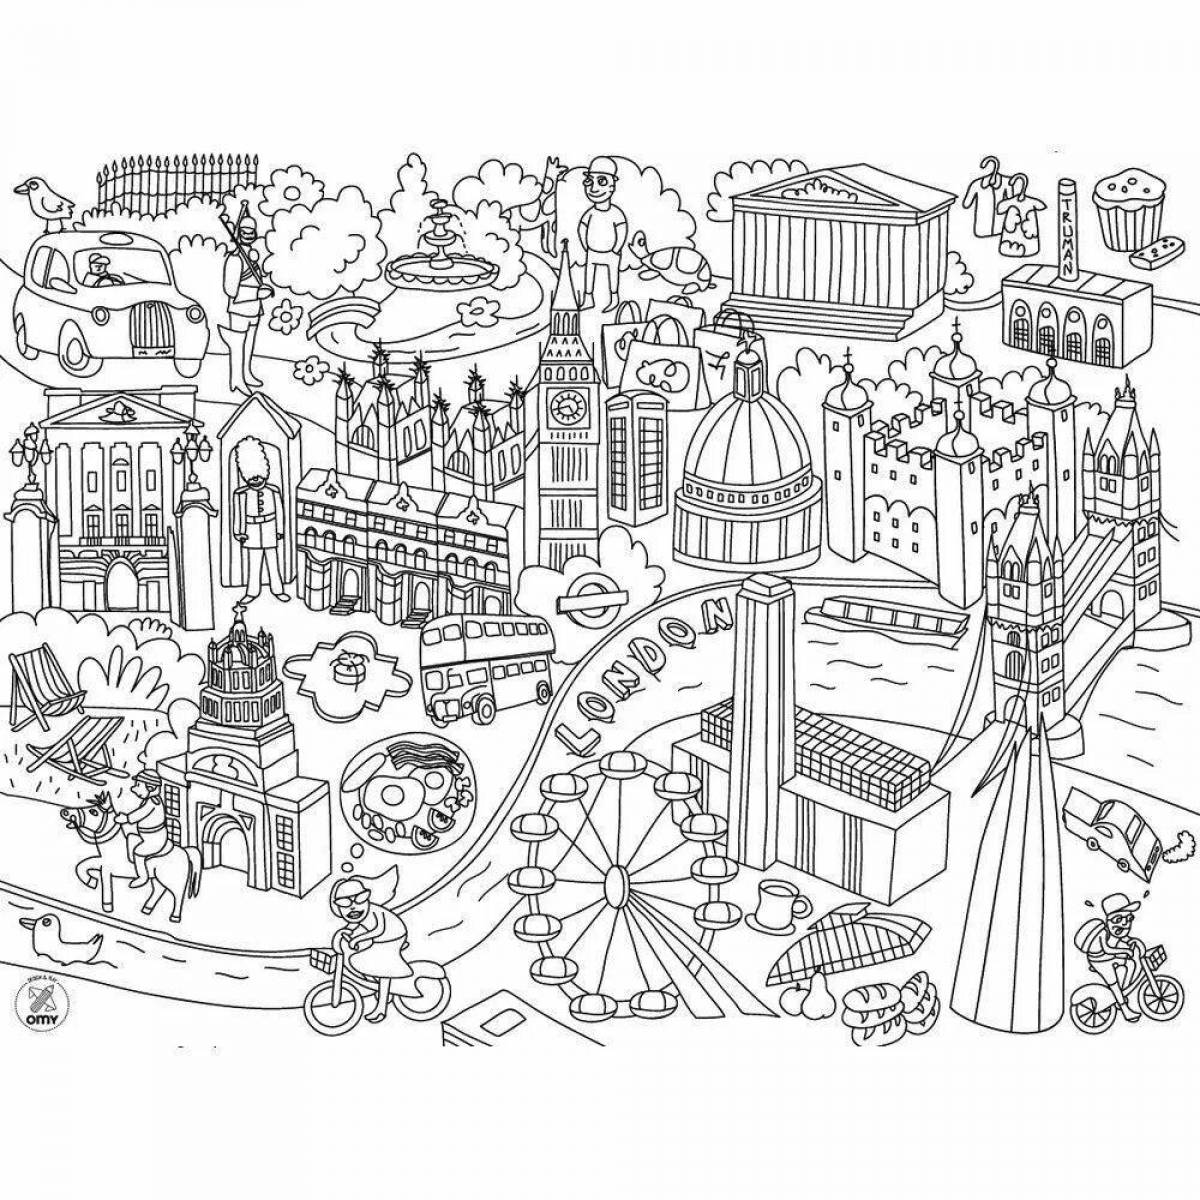 Flawless City coloring page